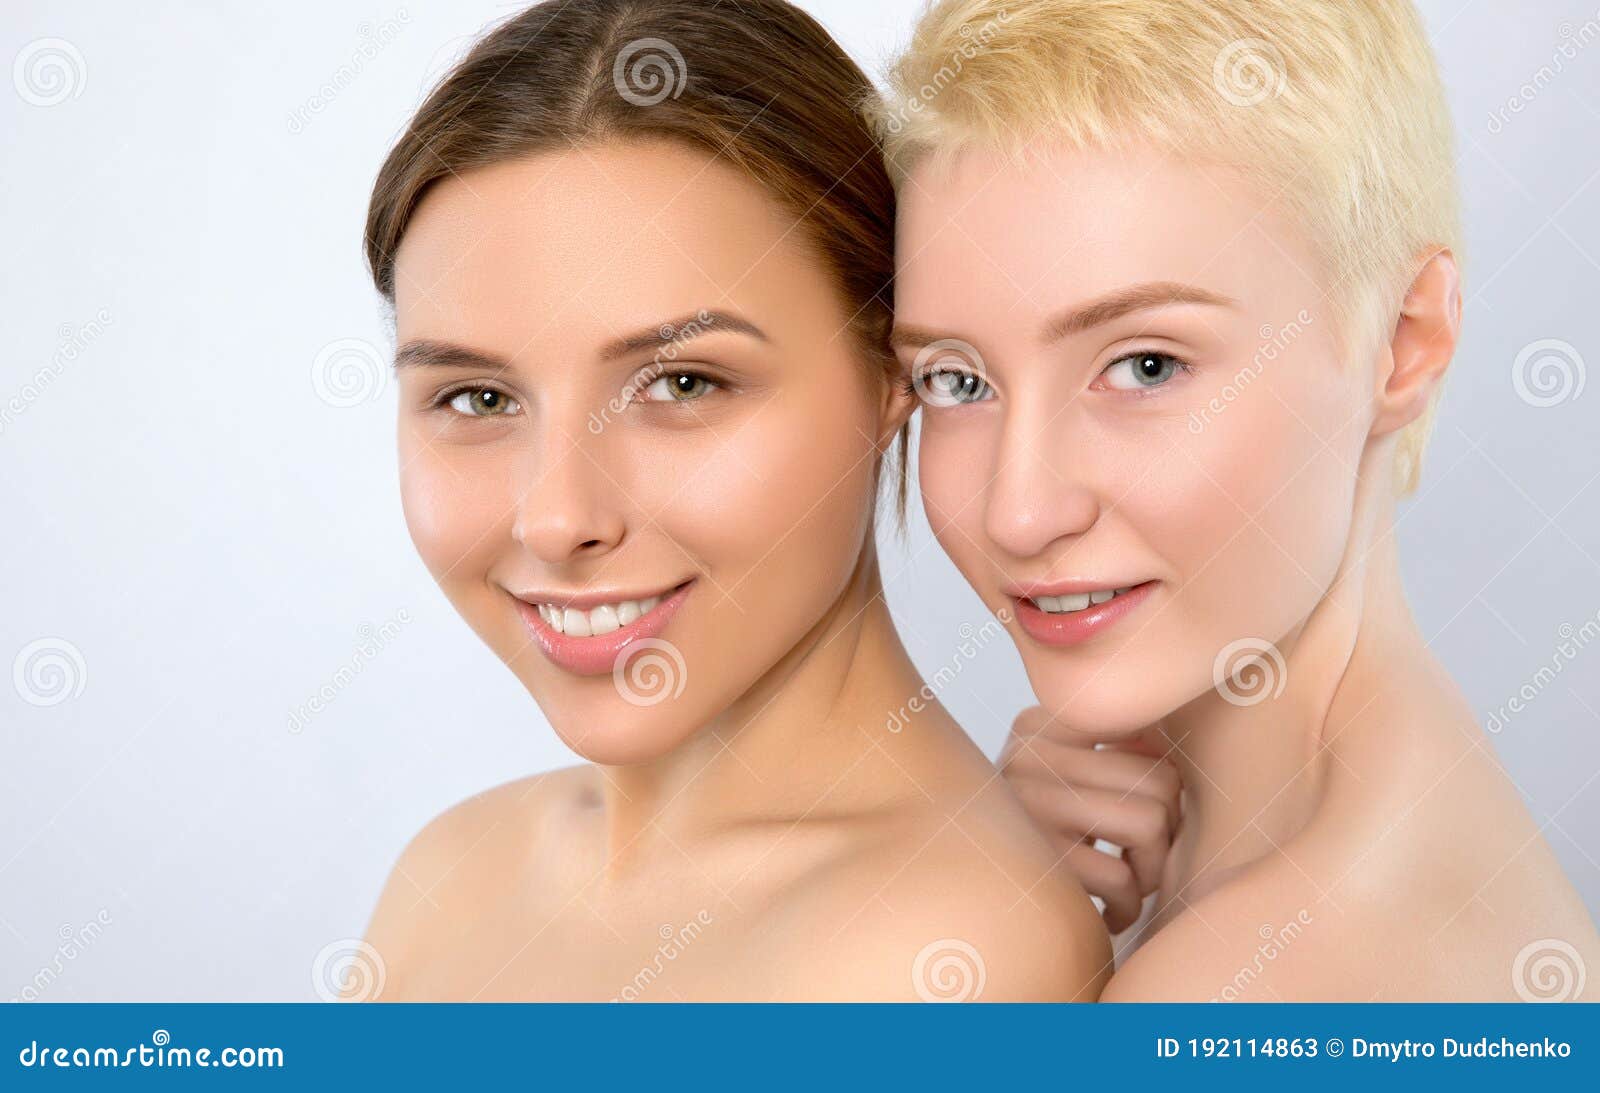 Two Beautiful Blonde Women, One with Blue Eyes and Short Hair, and the  Other with Light Brown Hair and Green Eyes. Aesthetic Stock Image - Image  of beautiful, girl: 192114863